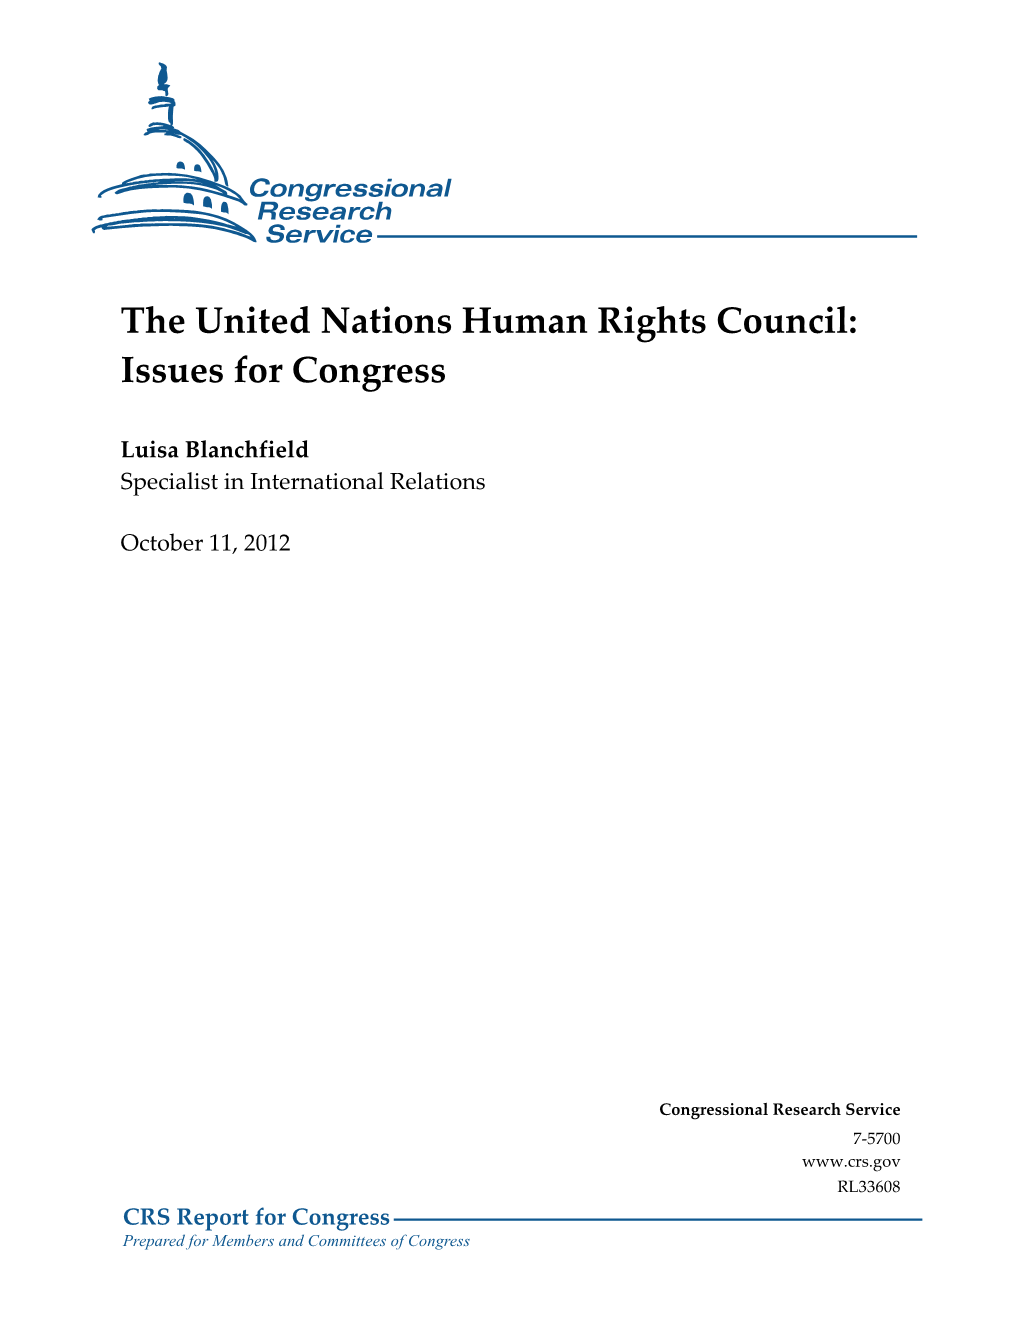 The United Nations Human Rights Council: Issues for Congress